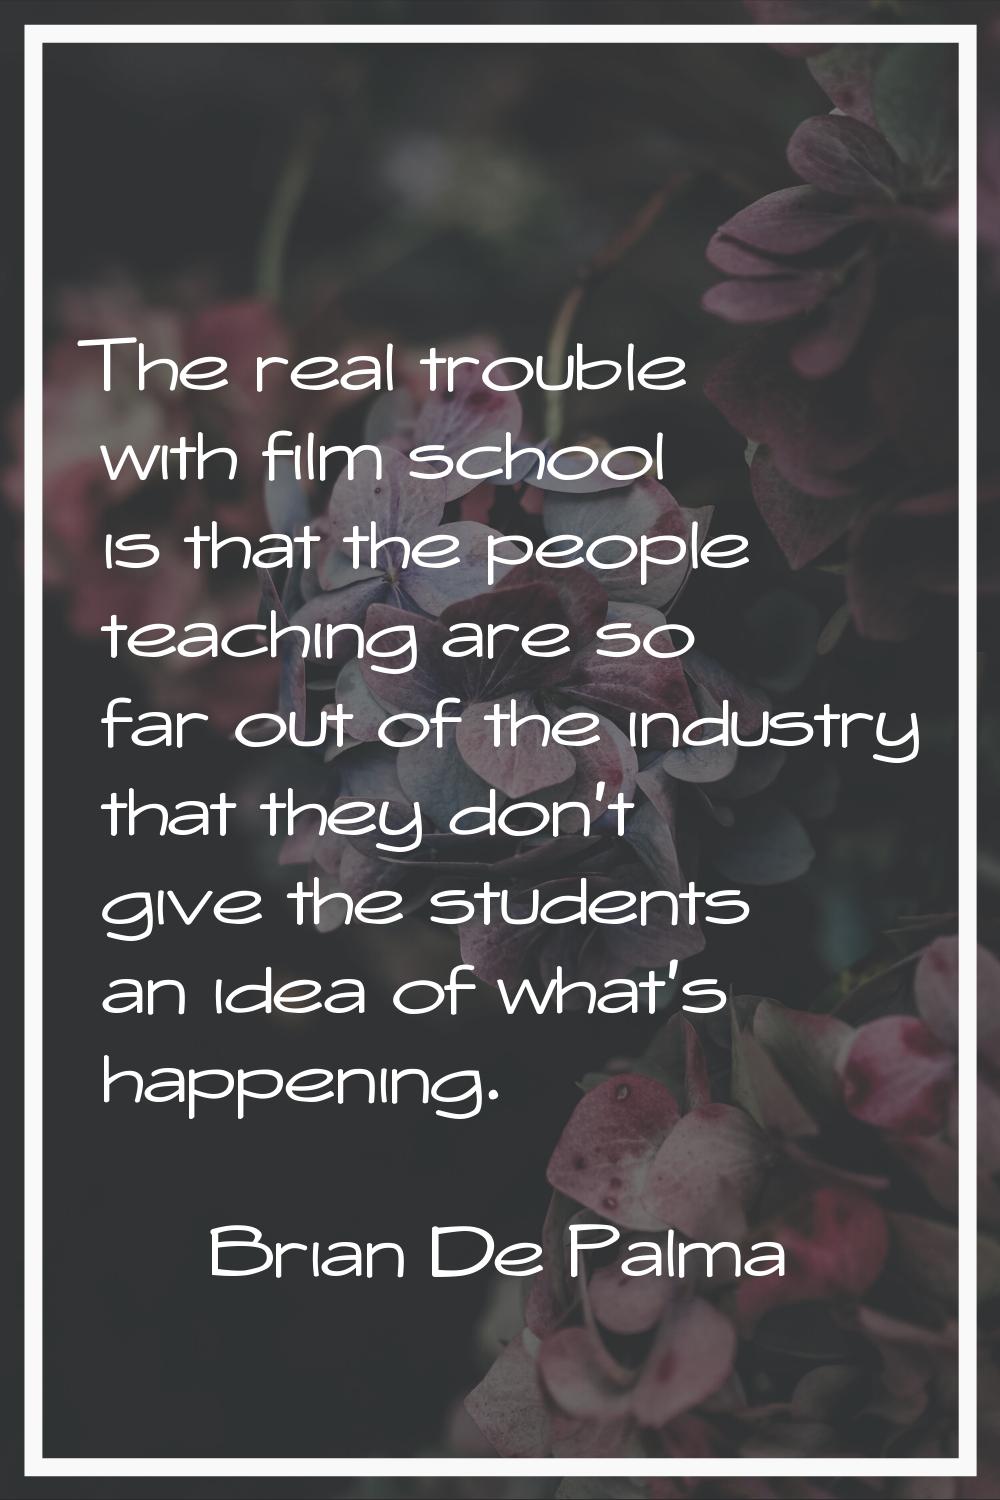 The real trouble with film school is that the people teaching are so far out of the industry that t